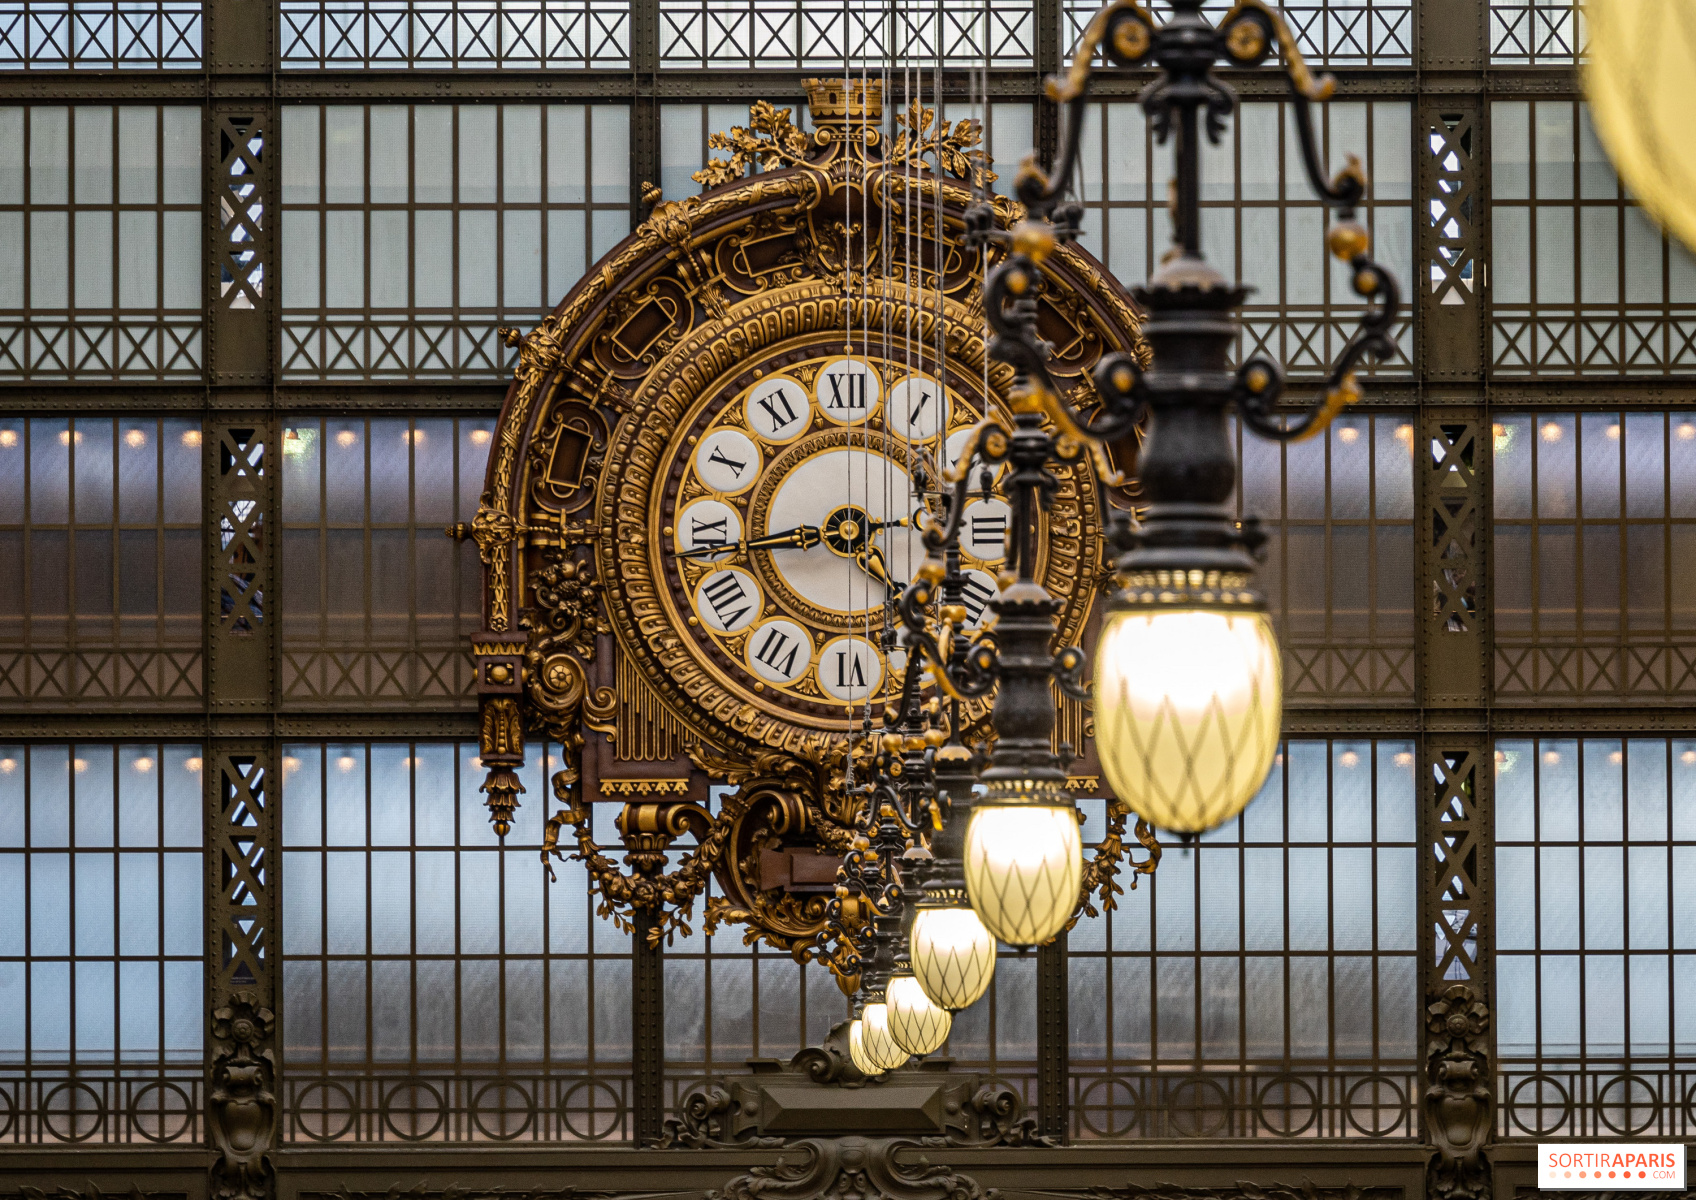 Musée d'Orsay: booking, prices, free admission, tips and current